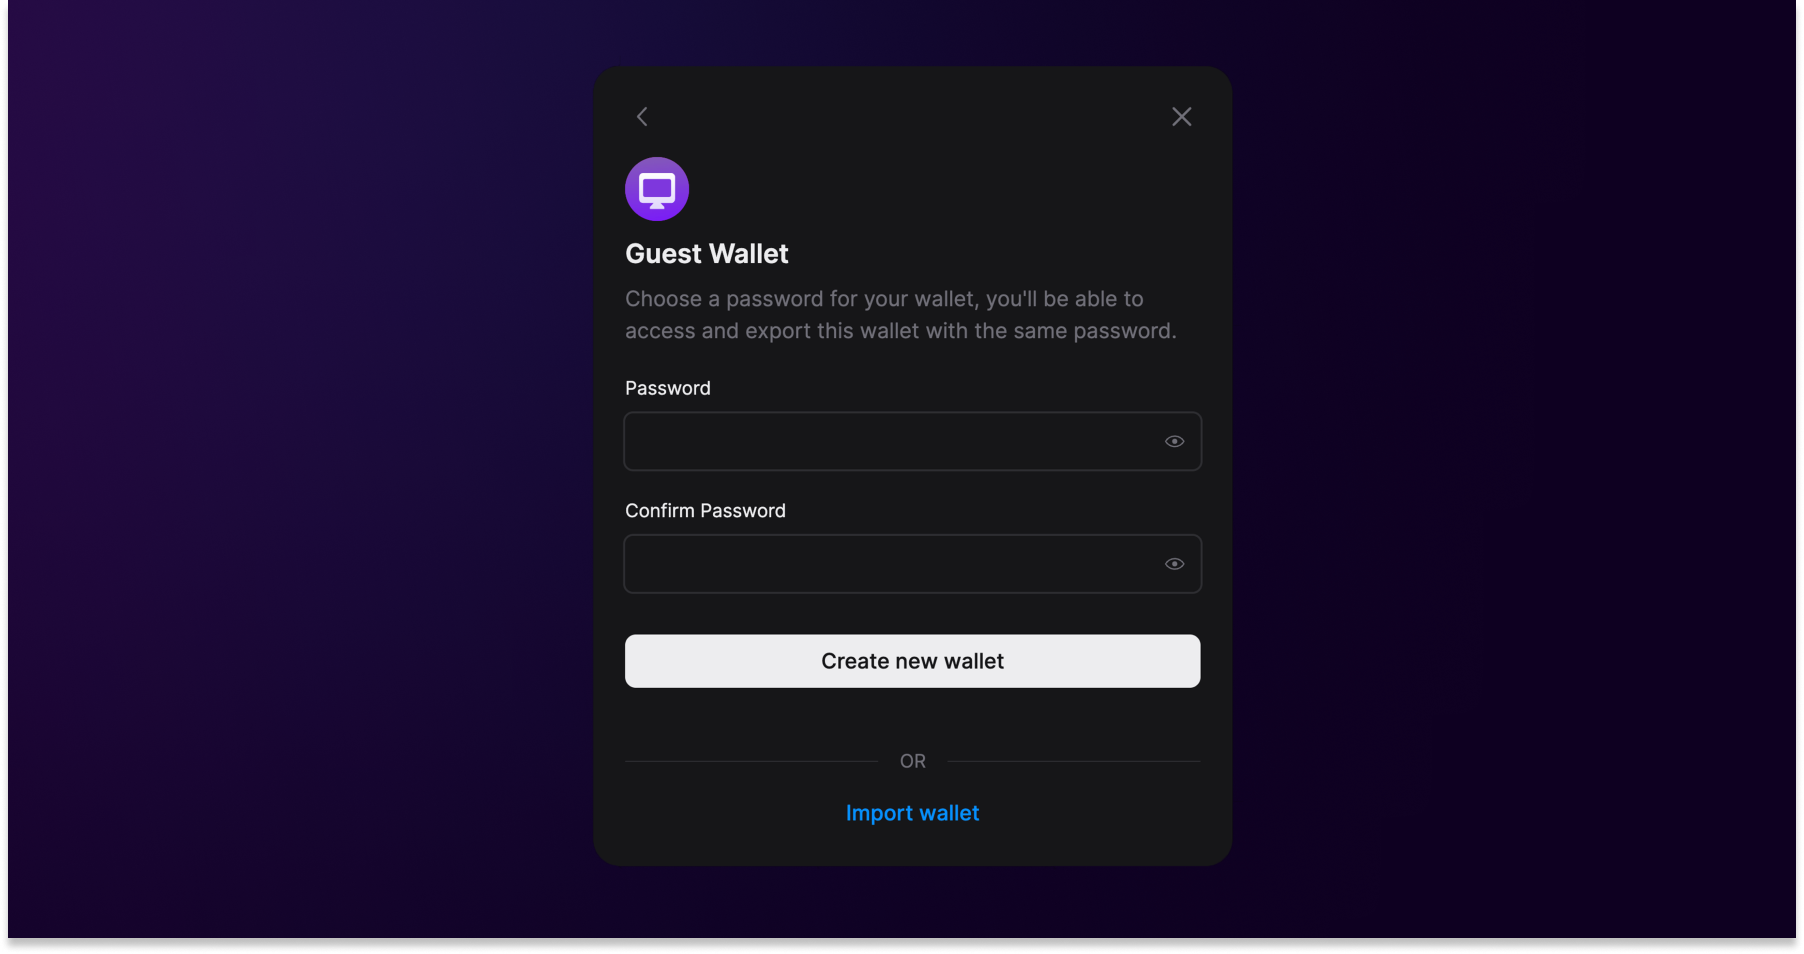 Username-and-password flow for Guest wallets